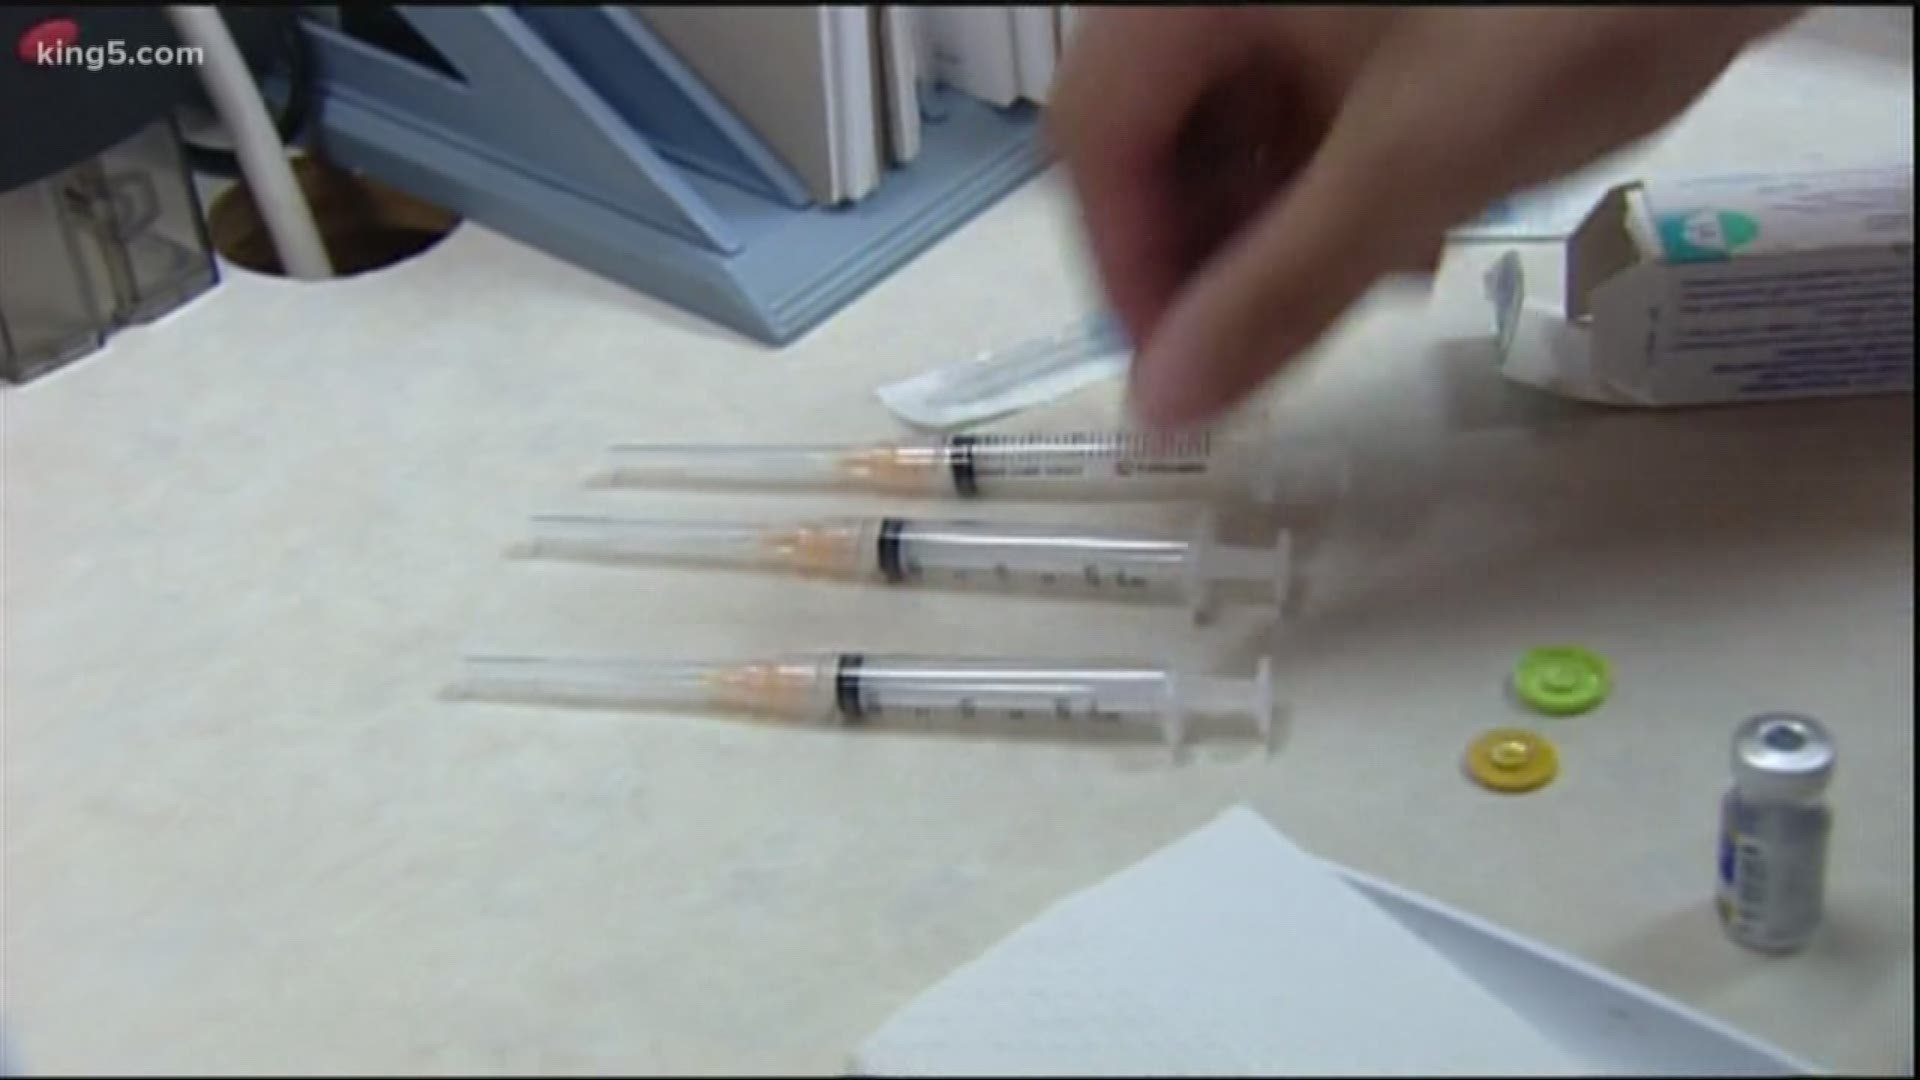 Health officials are keeping tabs on the novel coronavirus case in Washington state.